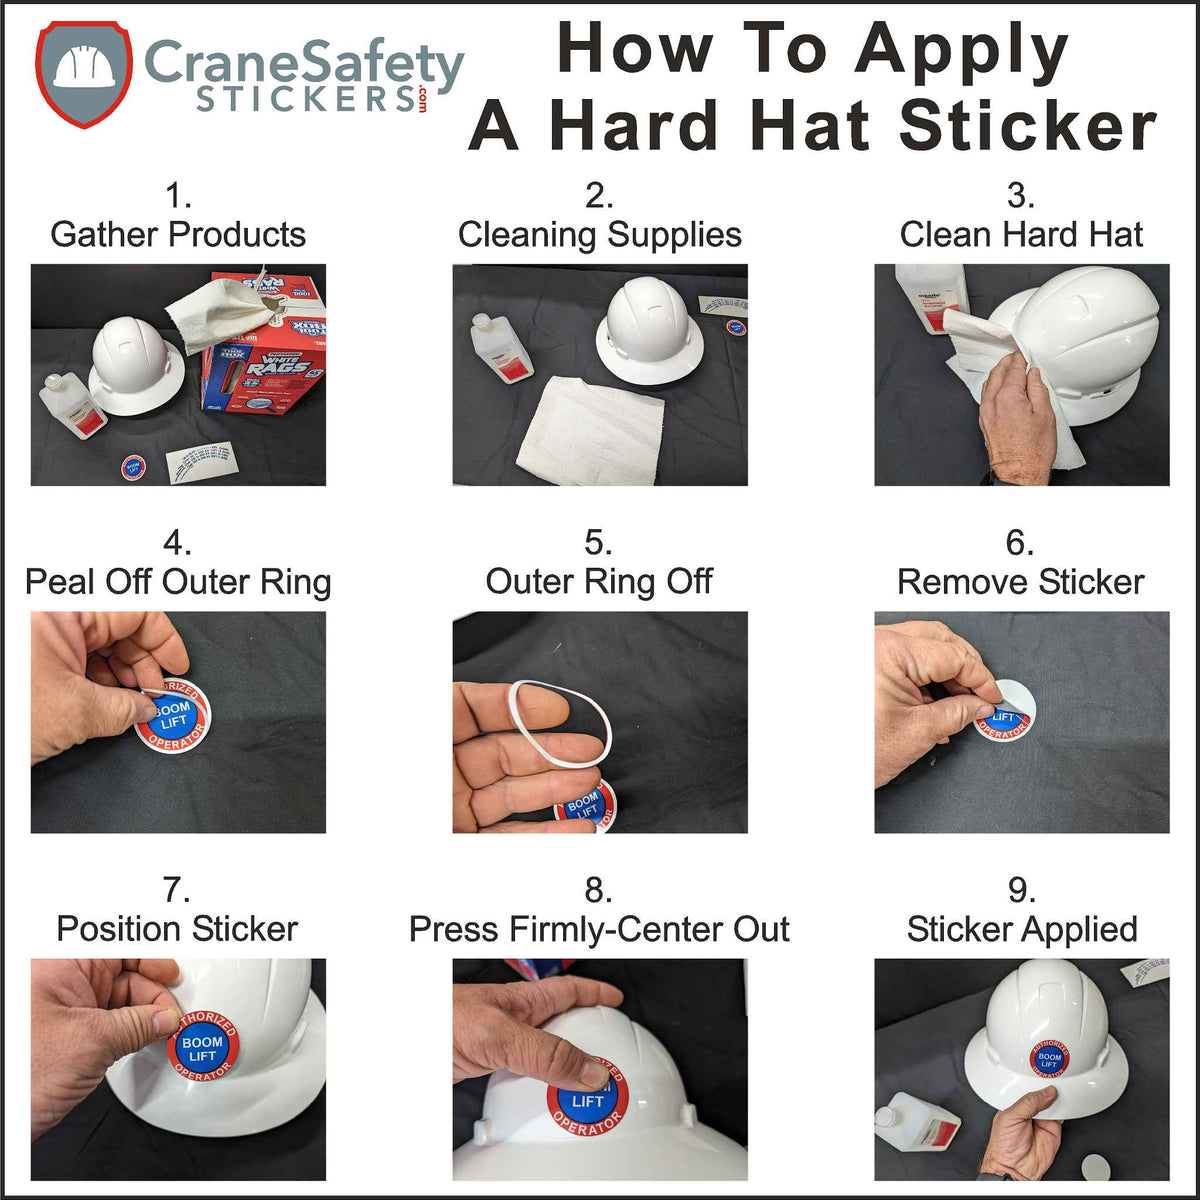 How To Apply Our Make Time To Practice Safety Everyday Sticker On A Hard Hat.